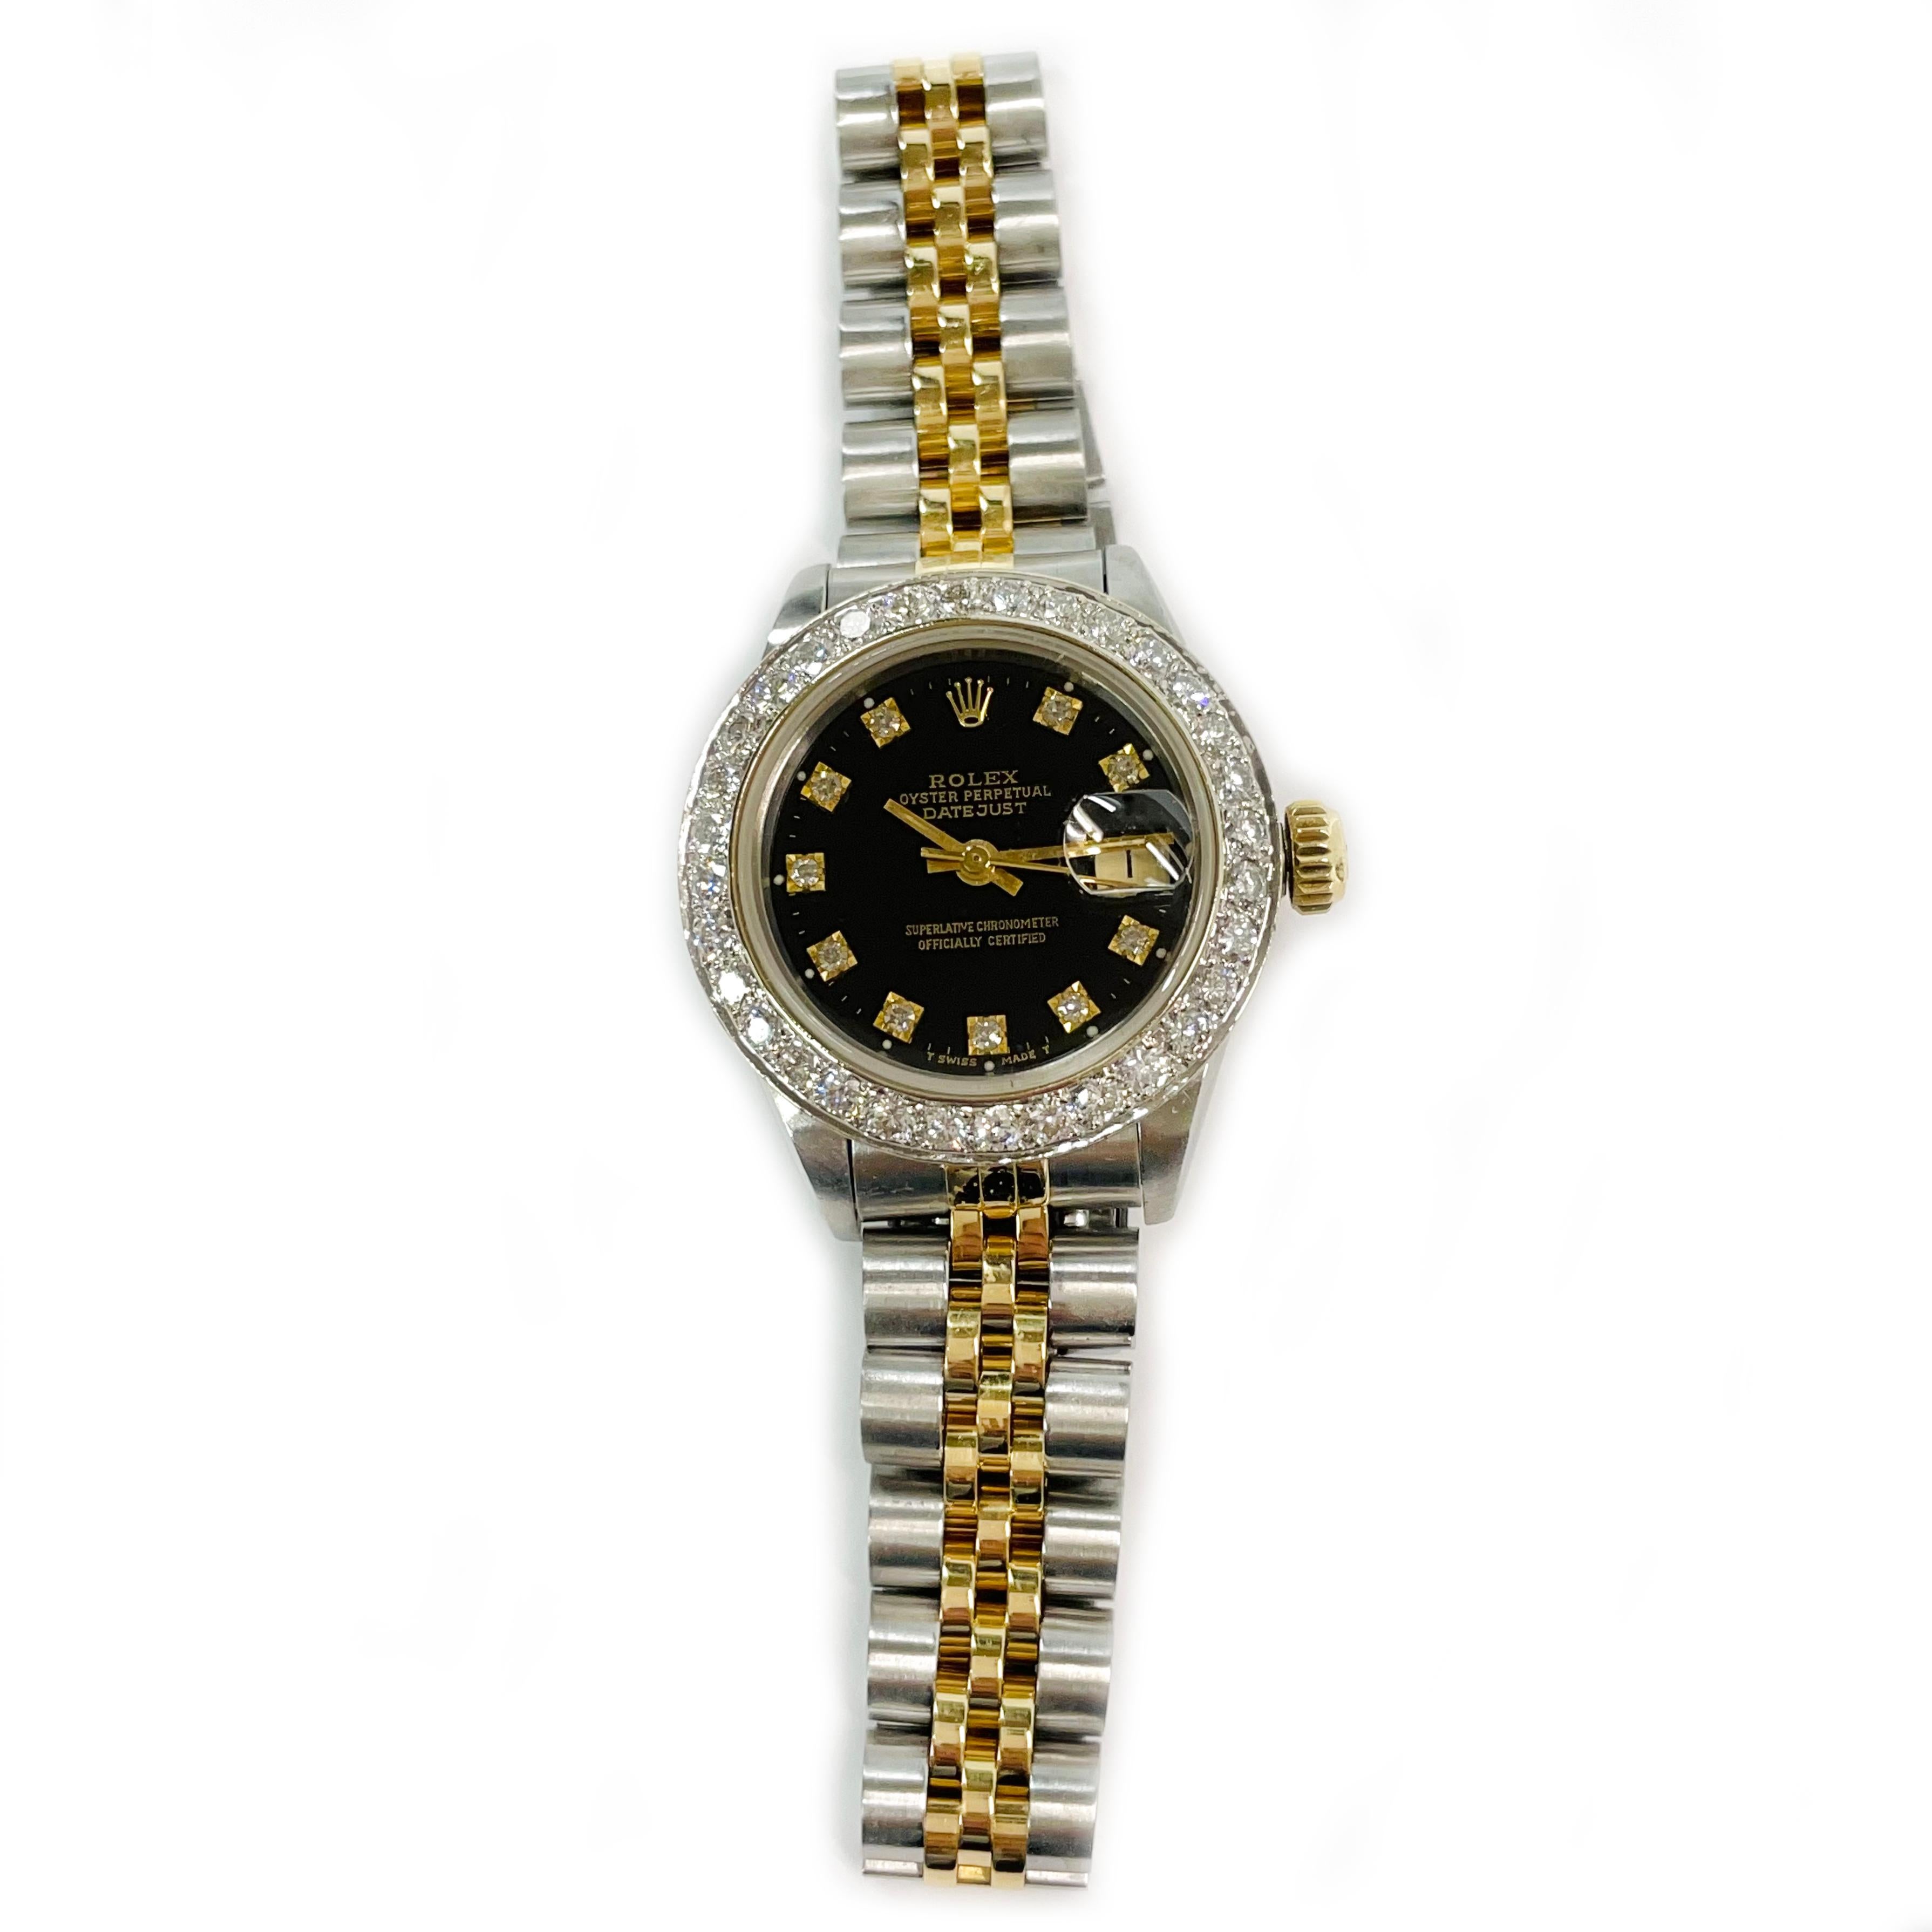 Ladies Two-Tone Rolex Oyster Perpetual Datejust Diamond Bezel Wristwatch. Exquisite wristwatch with a black dial, gold hour, minute, and second hand, diamond hours, and diamond bezel. There are thirty-two 2.1mm round pave-set diamonds set on the